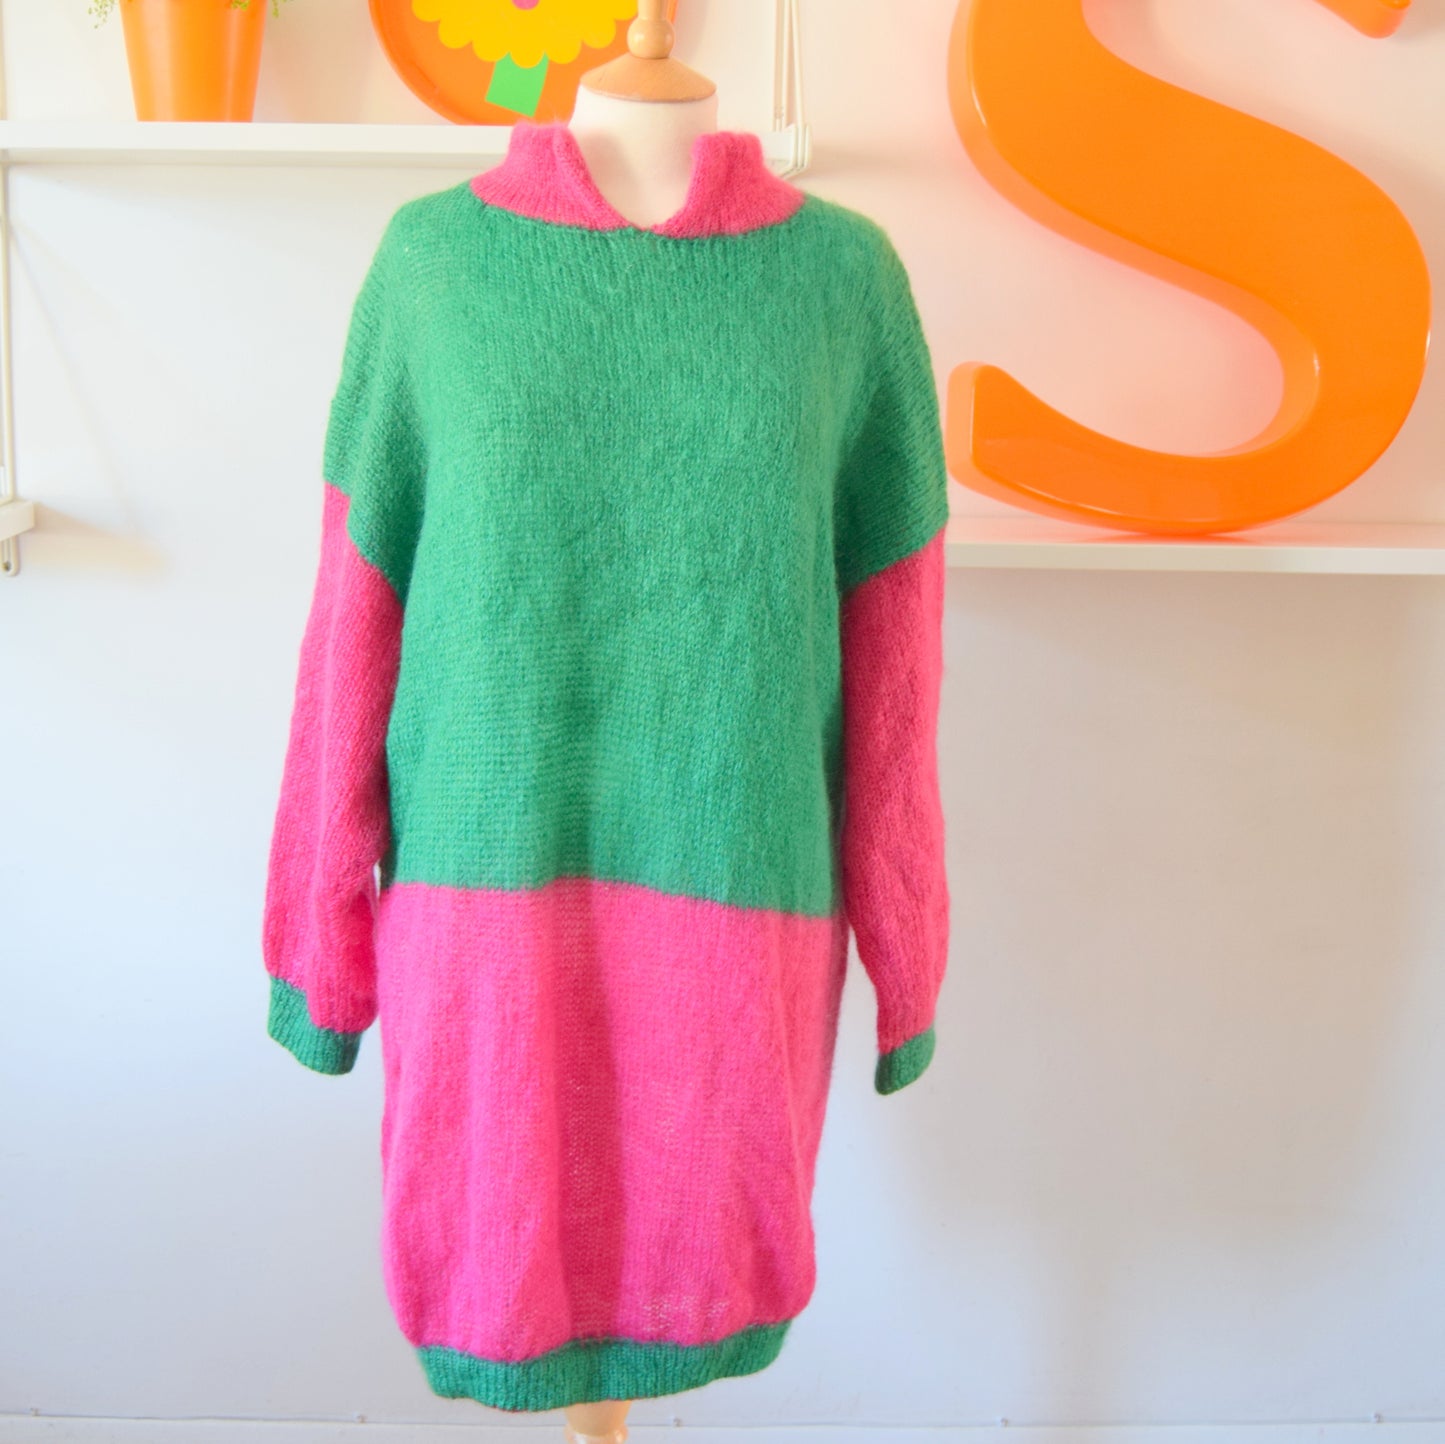 Vintage 1980s Handmade Mohair Fluffy Dress - One Size - Bright Pink / Green